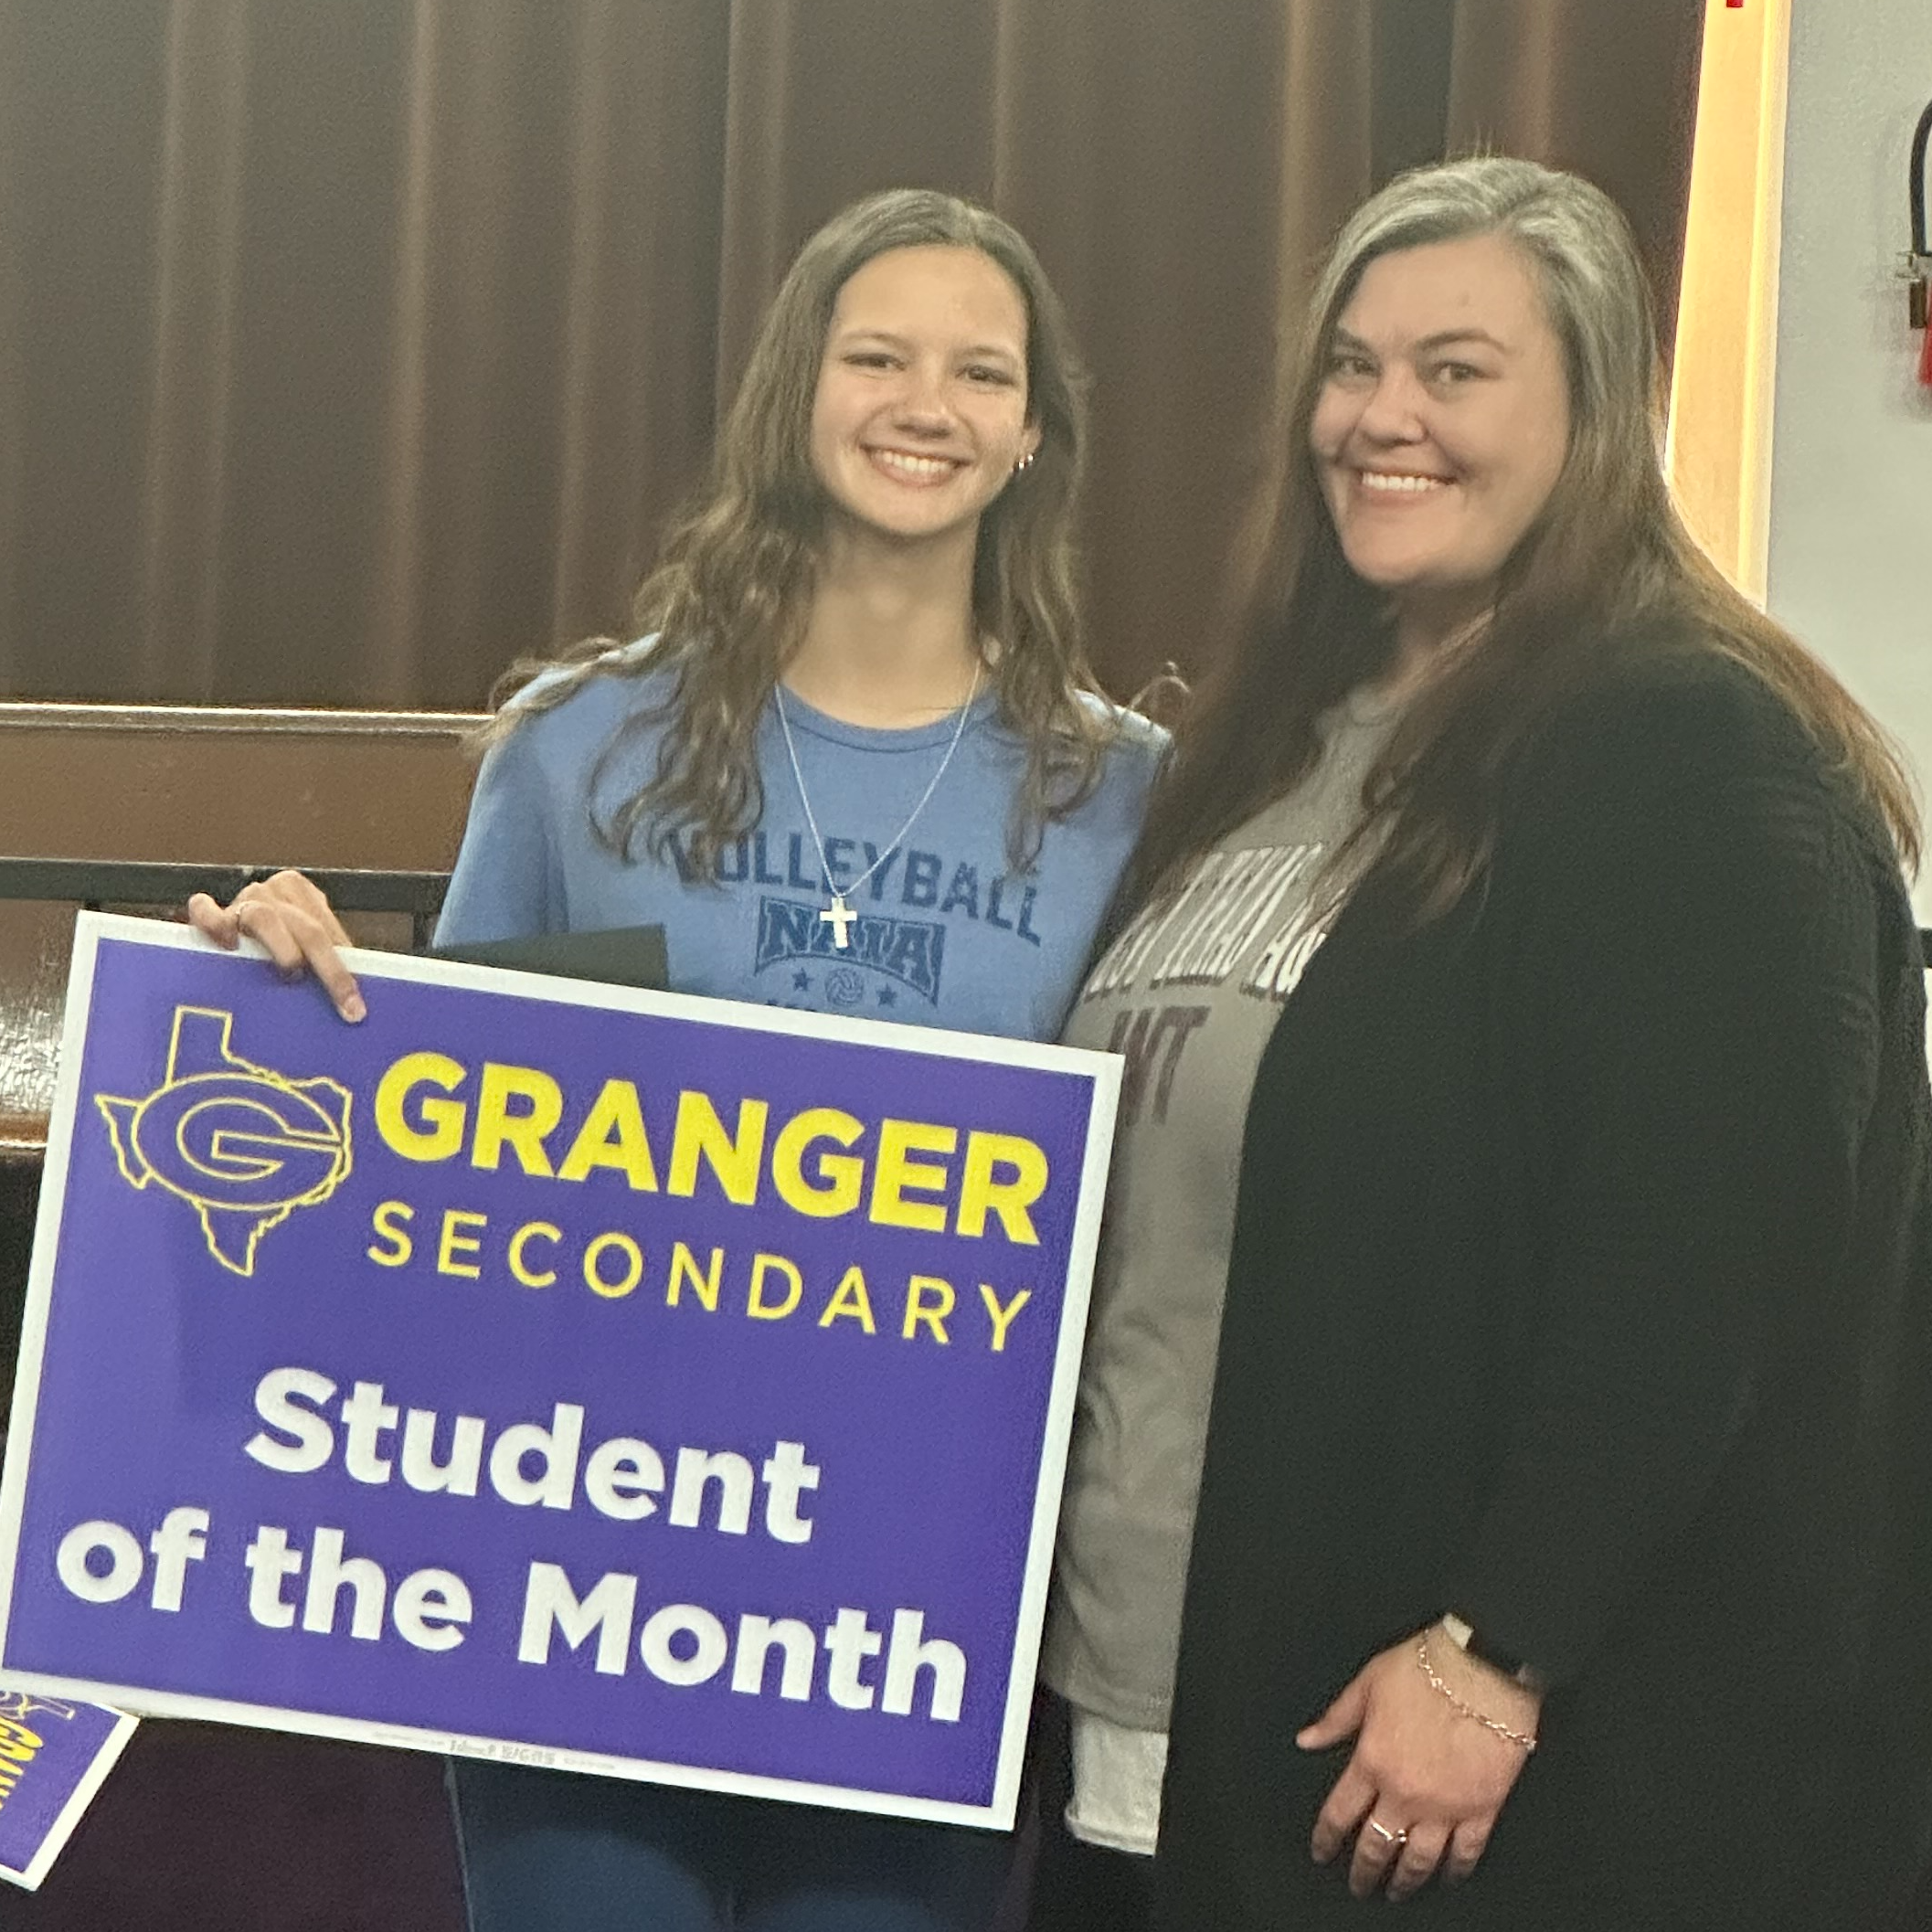 GISD Secondary Student of the Month